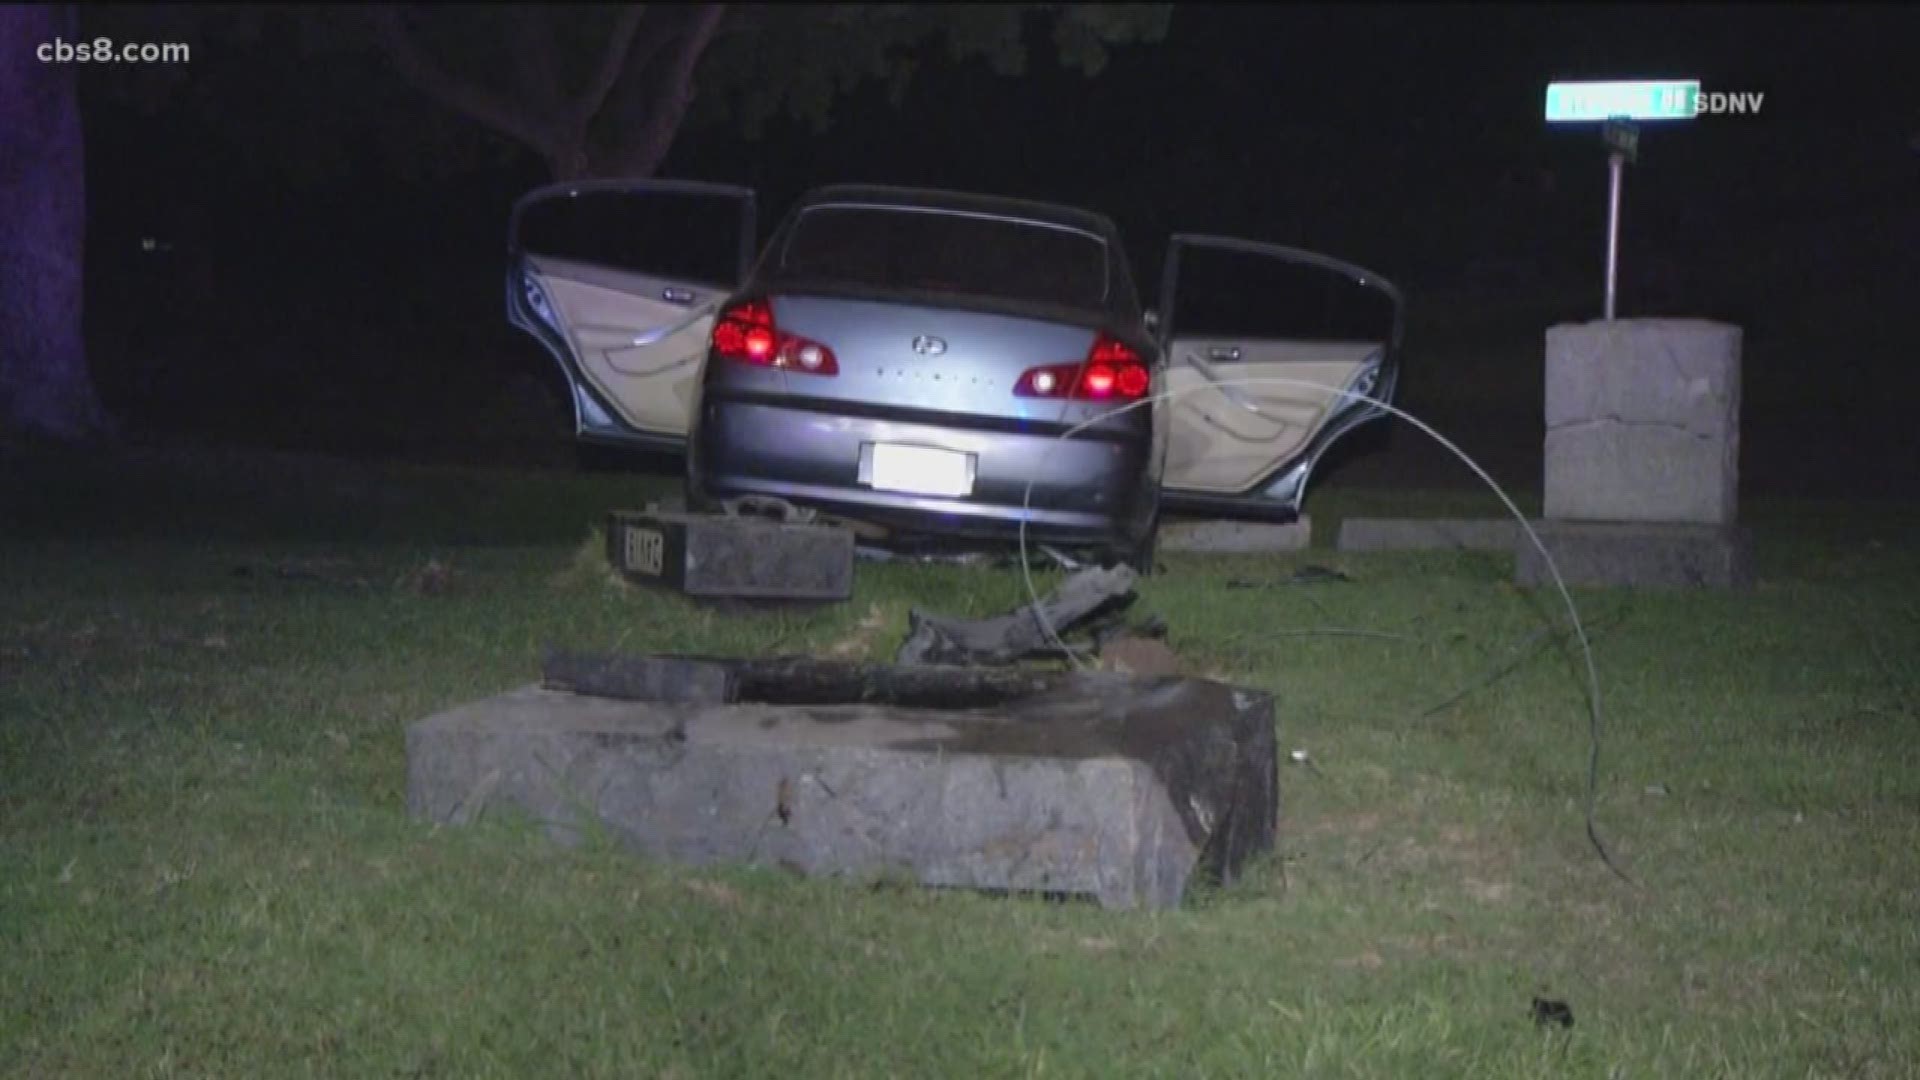 Police say a woman was grabbing onto the vehicle before the car swerved off Imperial Blvd. and crashed into the cemetery.